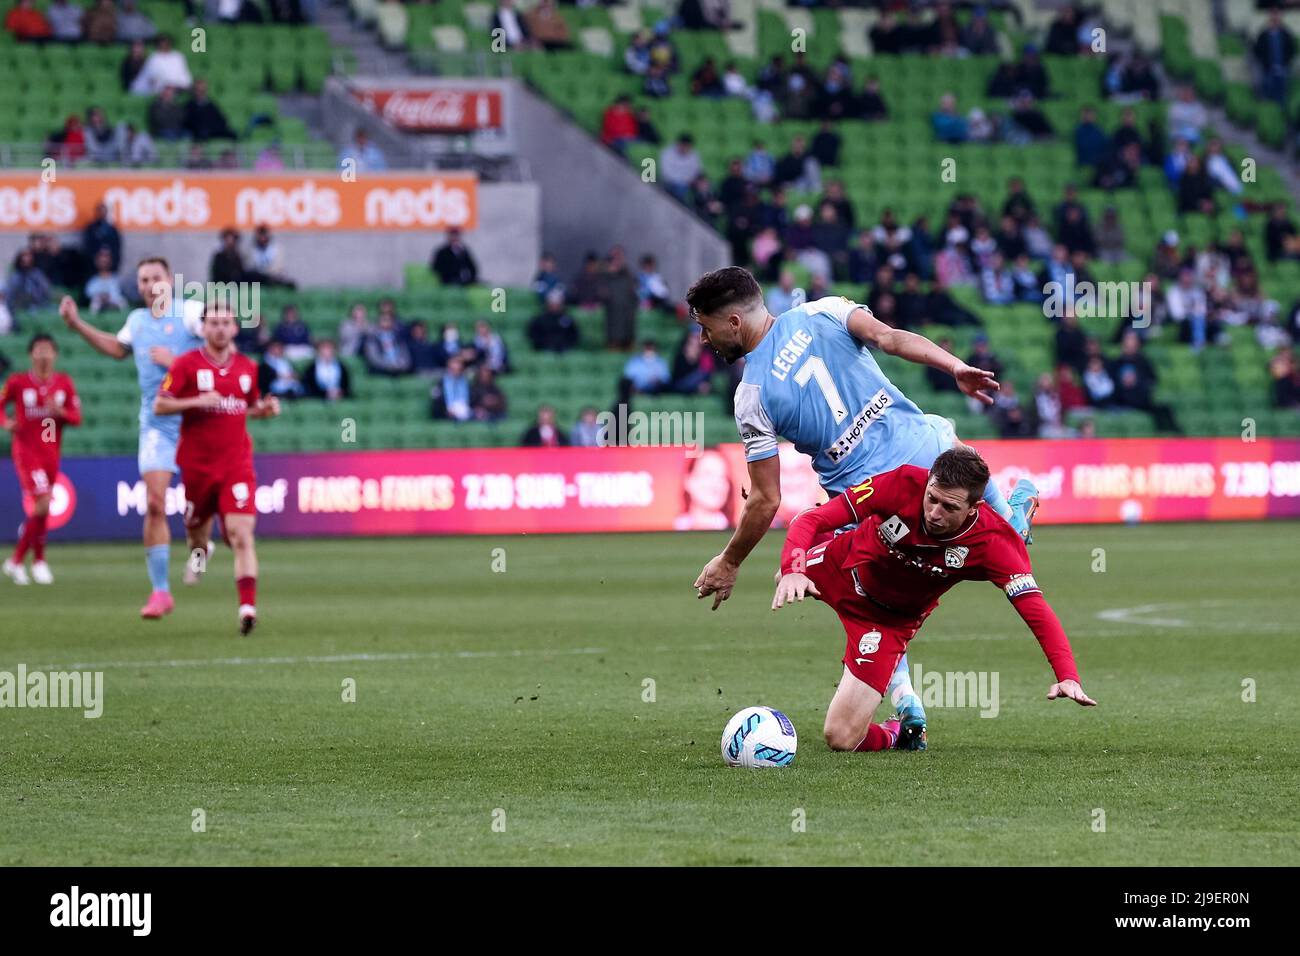 Melbourne, Australia, 22 May, 2022. Mathew Leckie of Melbourne City FC heads the ball but falls over Craig Goodwin of Adelaide United during the A-League Semi Final soccer match between Melbourne City FC and Adelaide United at AAMI Park on May 22, 2022 in Melbourne, Australia. Credit: Dave Hewison/Speed Media/Alamy Live News Stock Photo